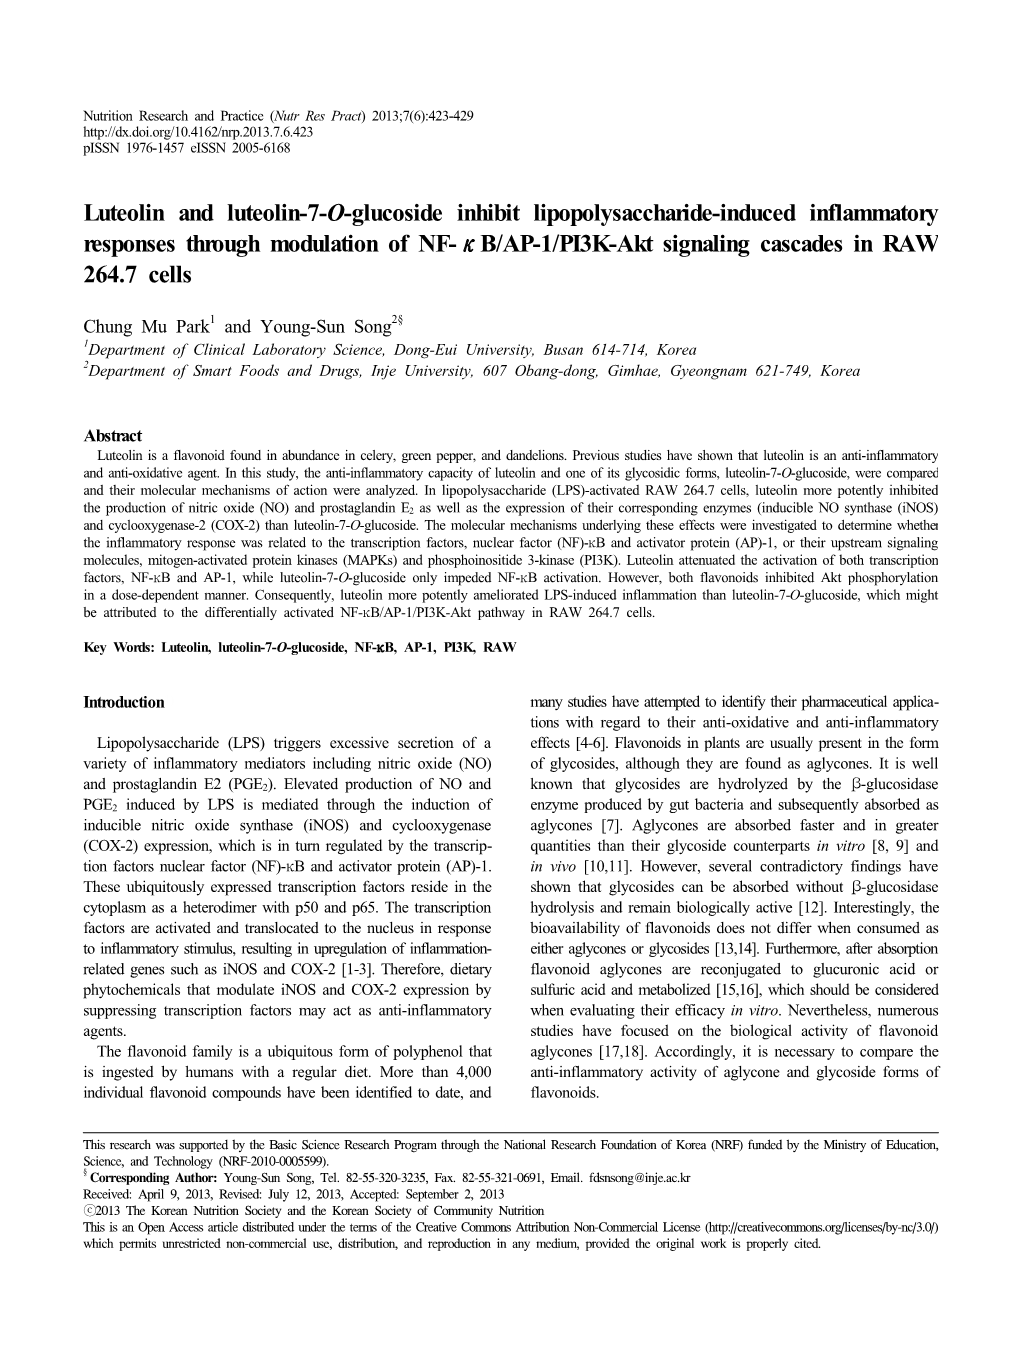 Luteolin and Luteolin-7-O-Glucoside Inhibit Lipopolysaccharide-Induced Inflammatory Responses Through Modulation of NF-Κb/AP-1